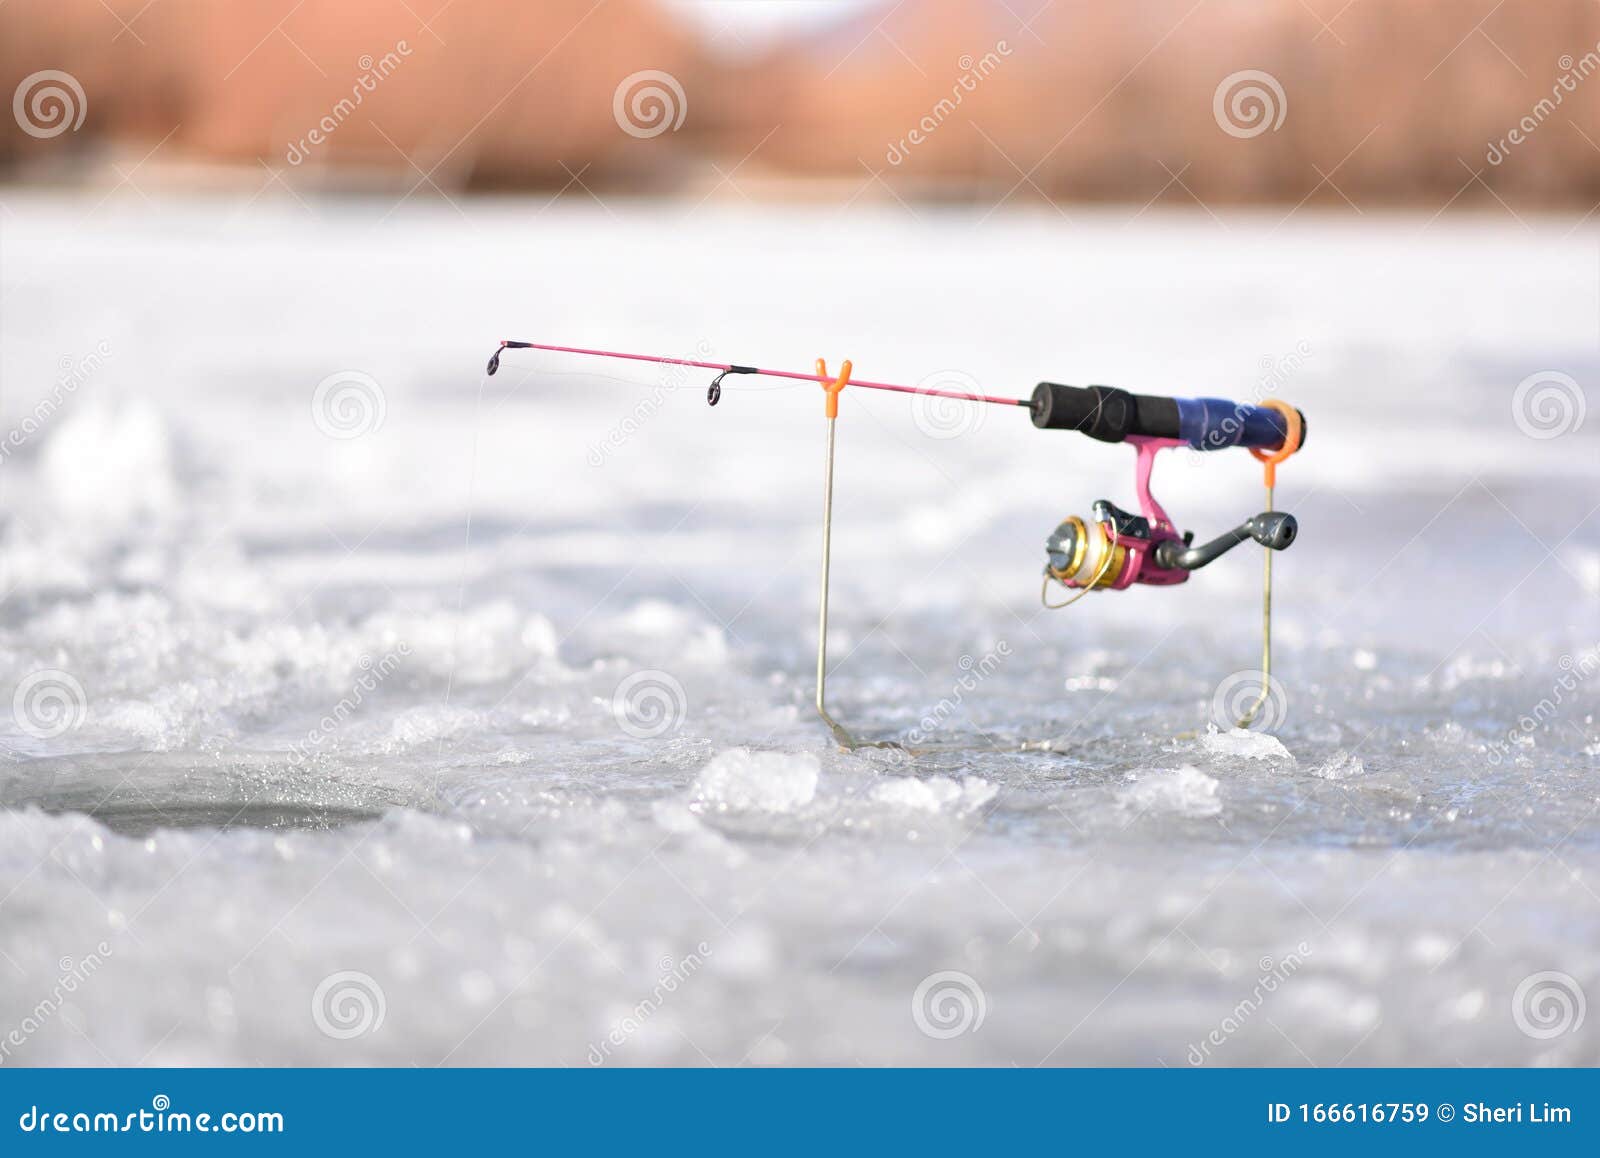 https://thumbs.dreamstime.com/z/ice-fishing-pole-pink-real-pole-sitting-ice-waiting-fish-ice-fishing-pole-pink-fishing-reel-reflection-166616759.jpg